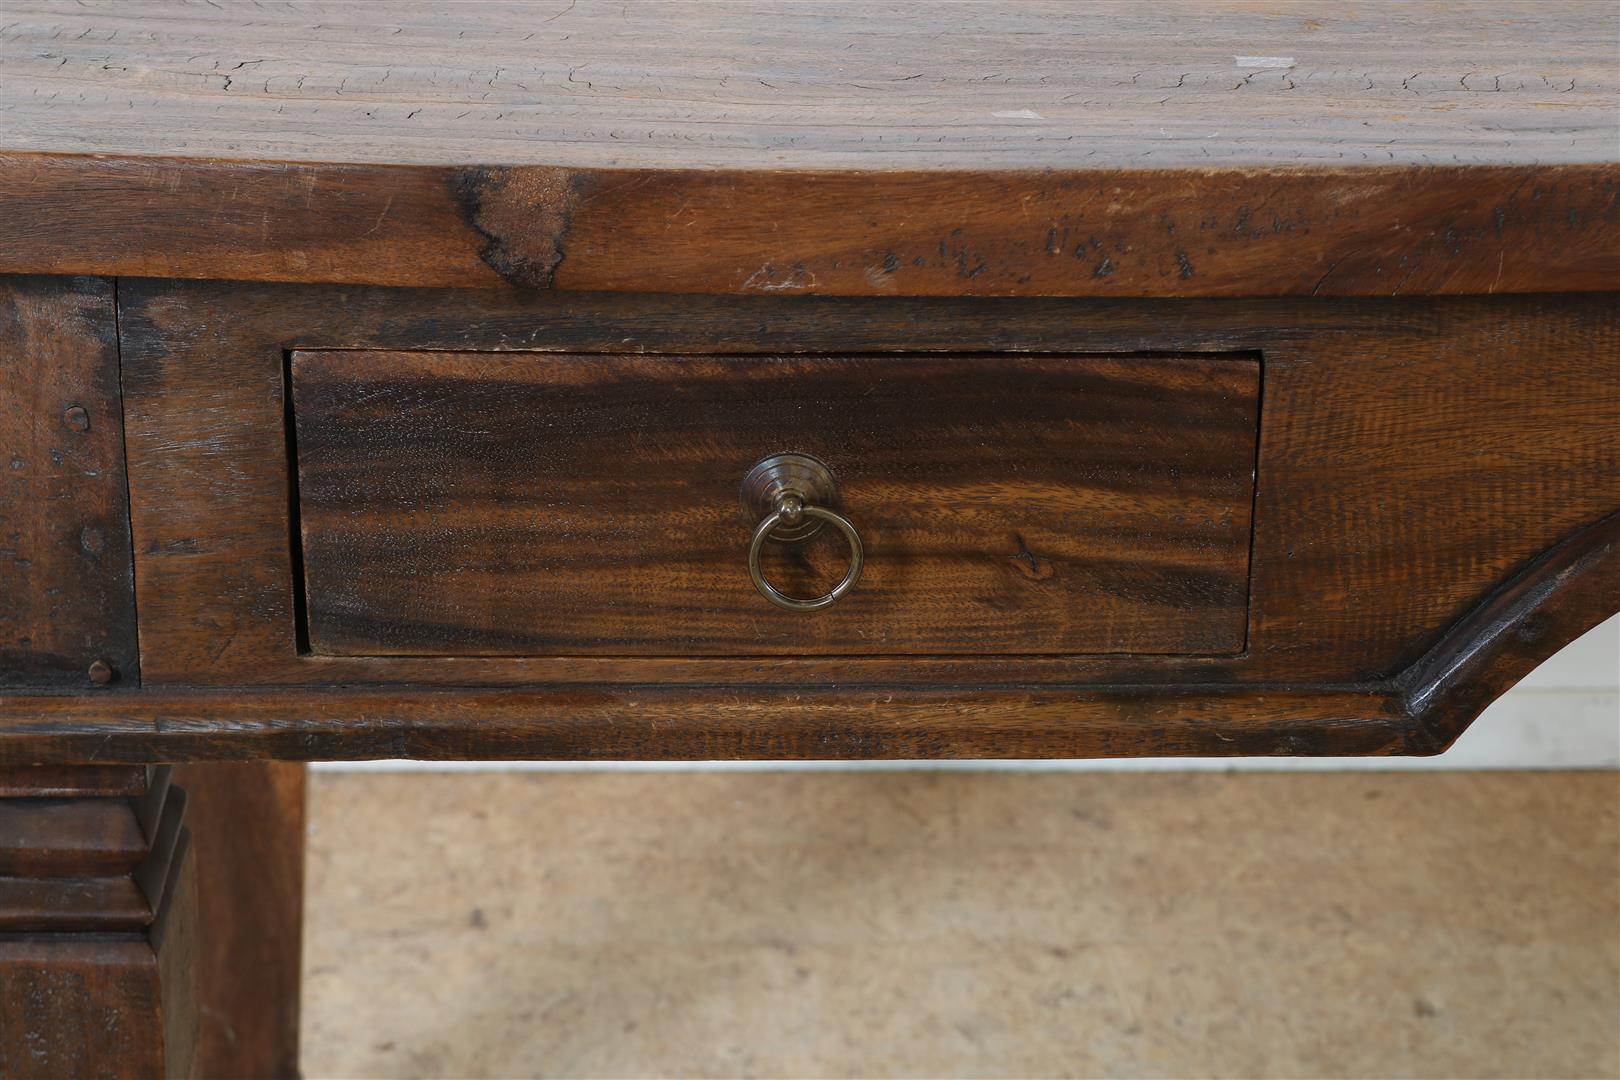 Teak table desk with 2 drawers on tapered legs, Indonesia, 83 x 175 x 73 cm. - Image 2 of 5